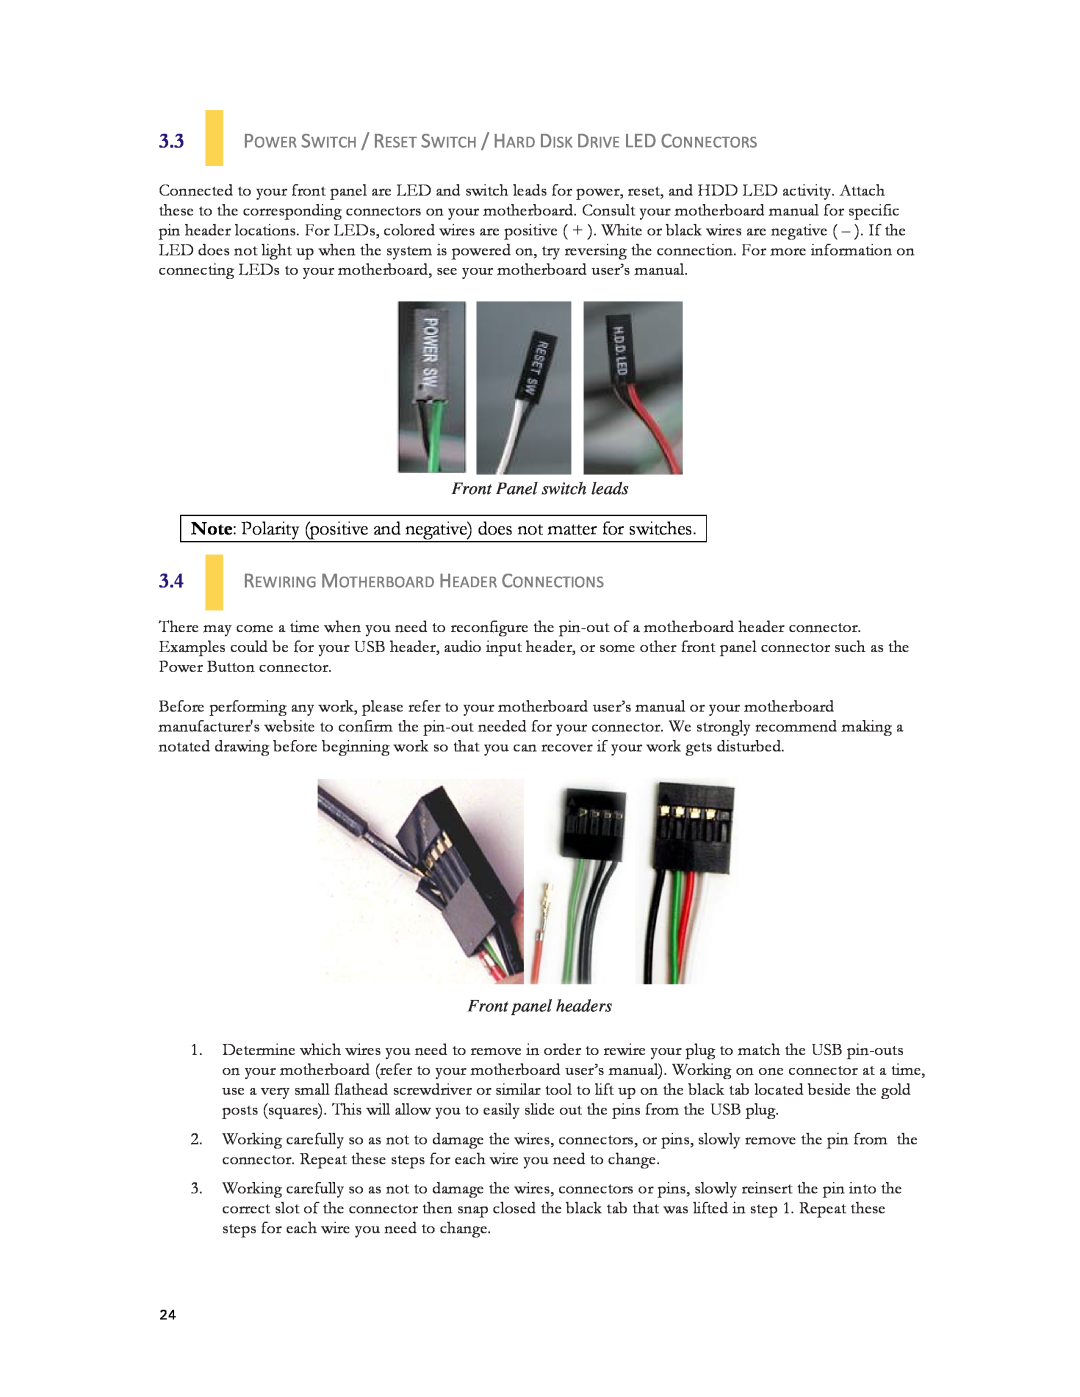 Antec DF-30 user manual Note Polarity positive and negative does not matter for switches, Front Panel switch leads 